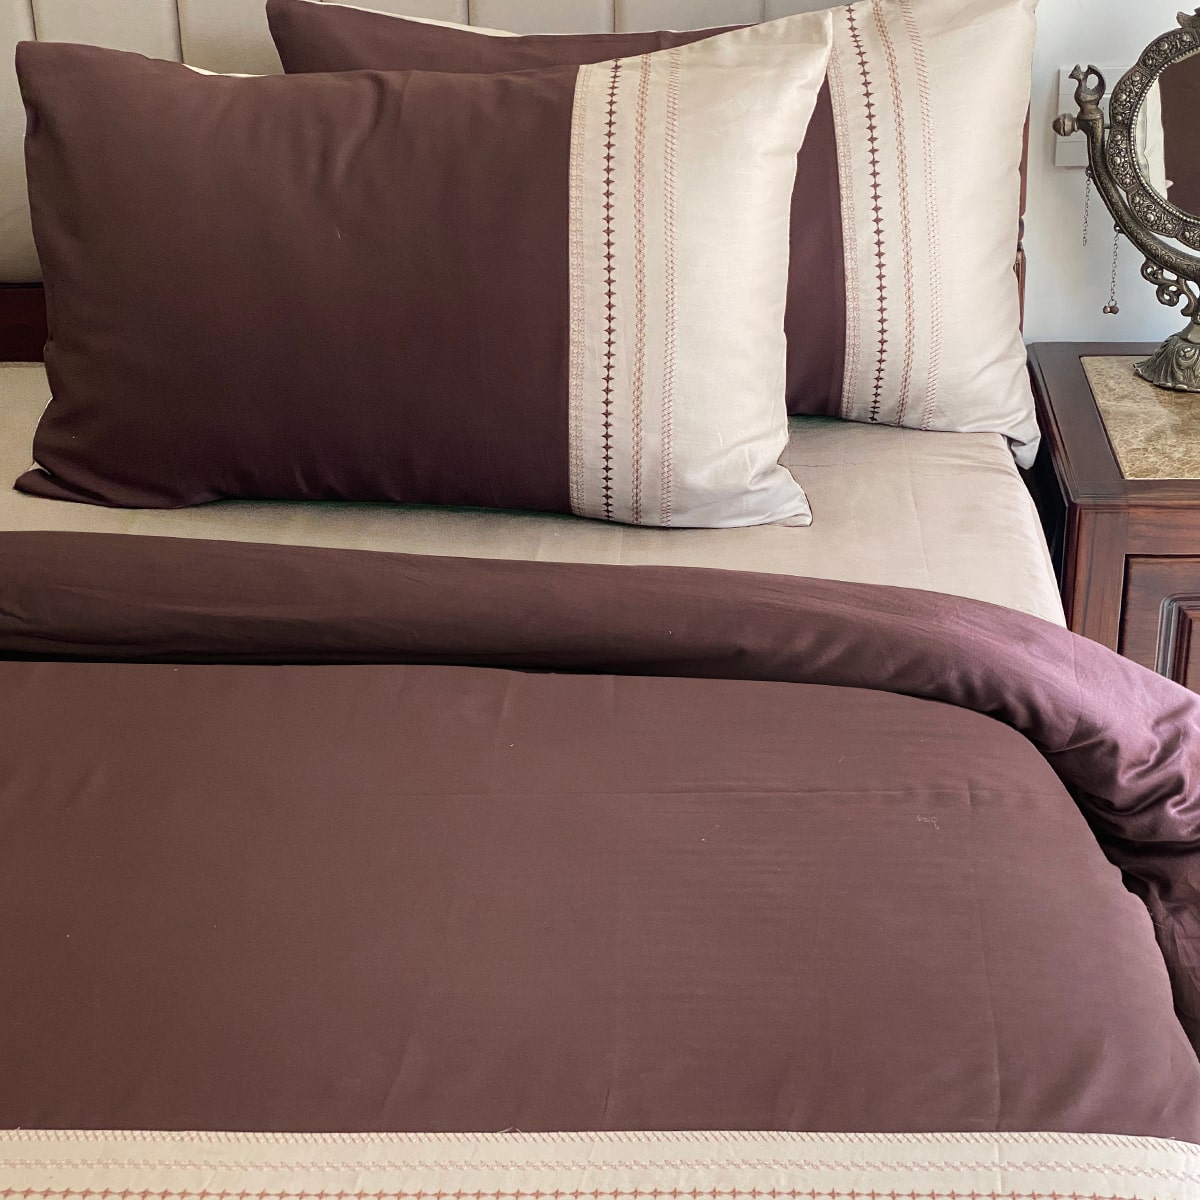 Divine Beige and Coffee Mesmeric Duvet Cover Set